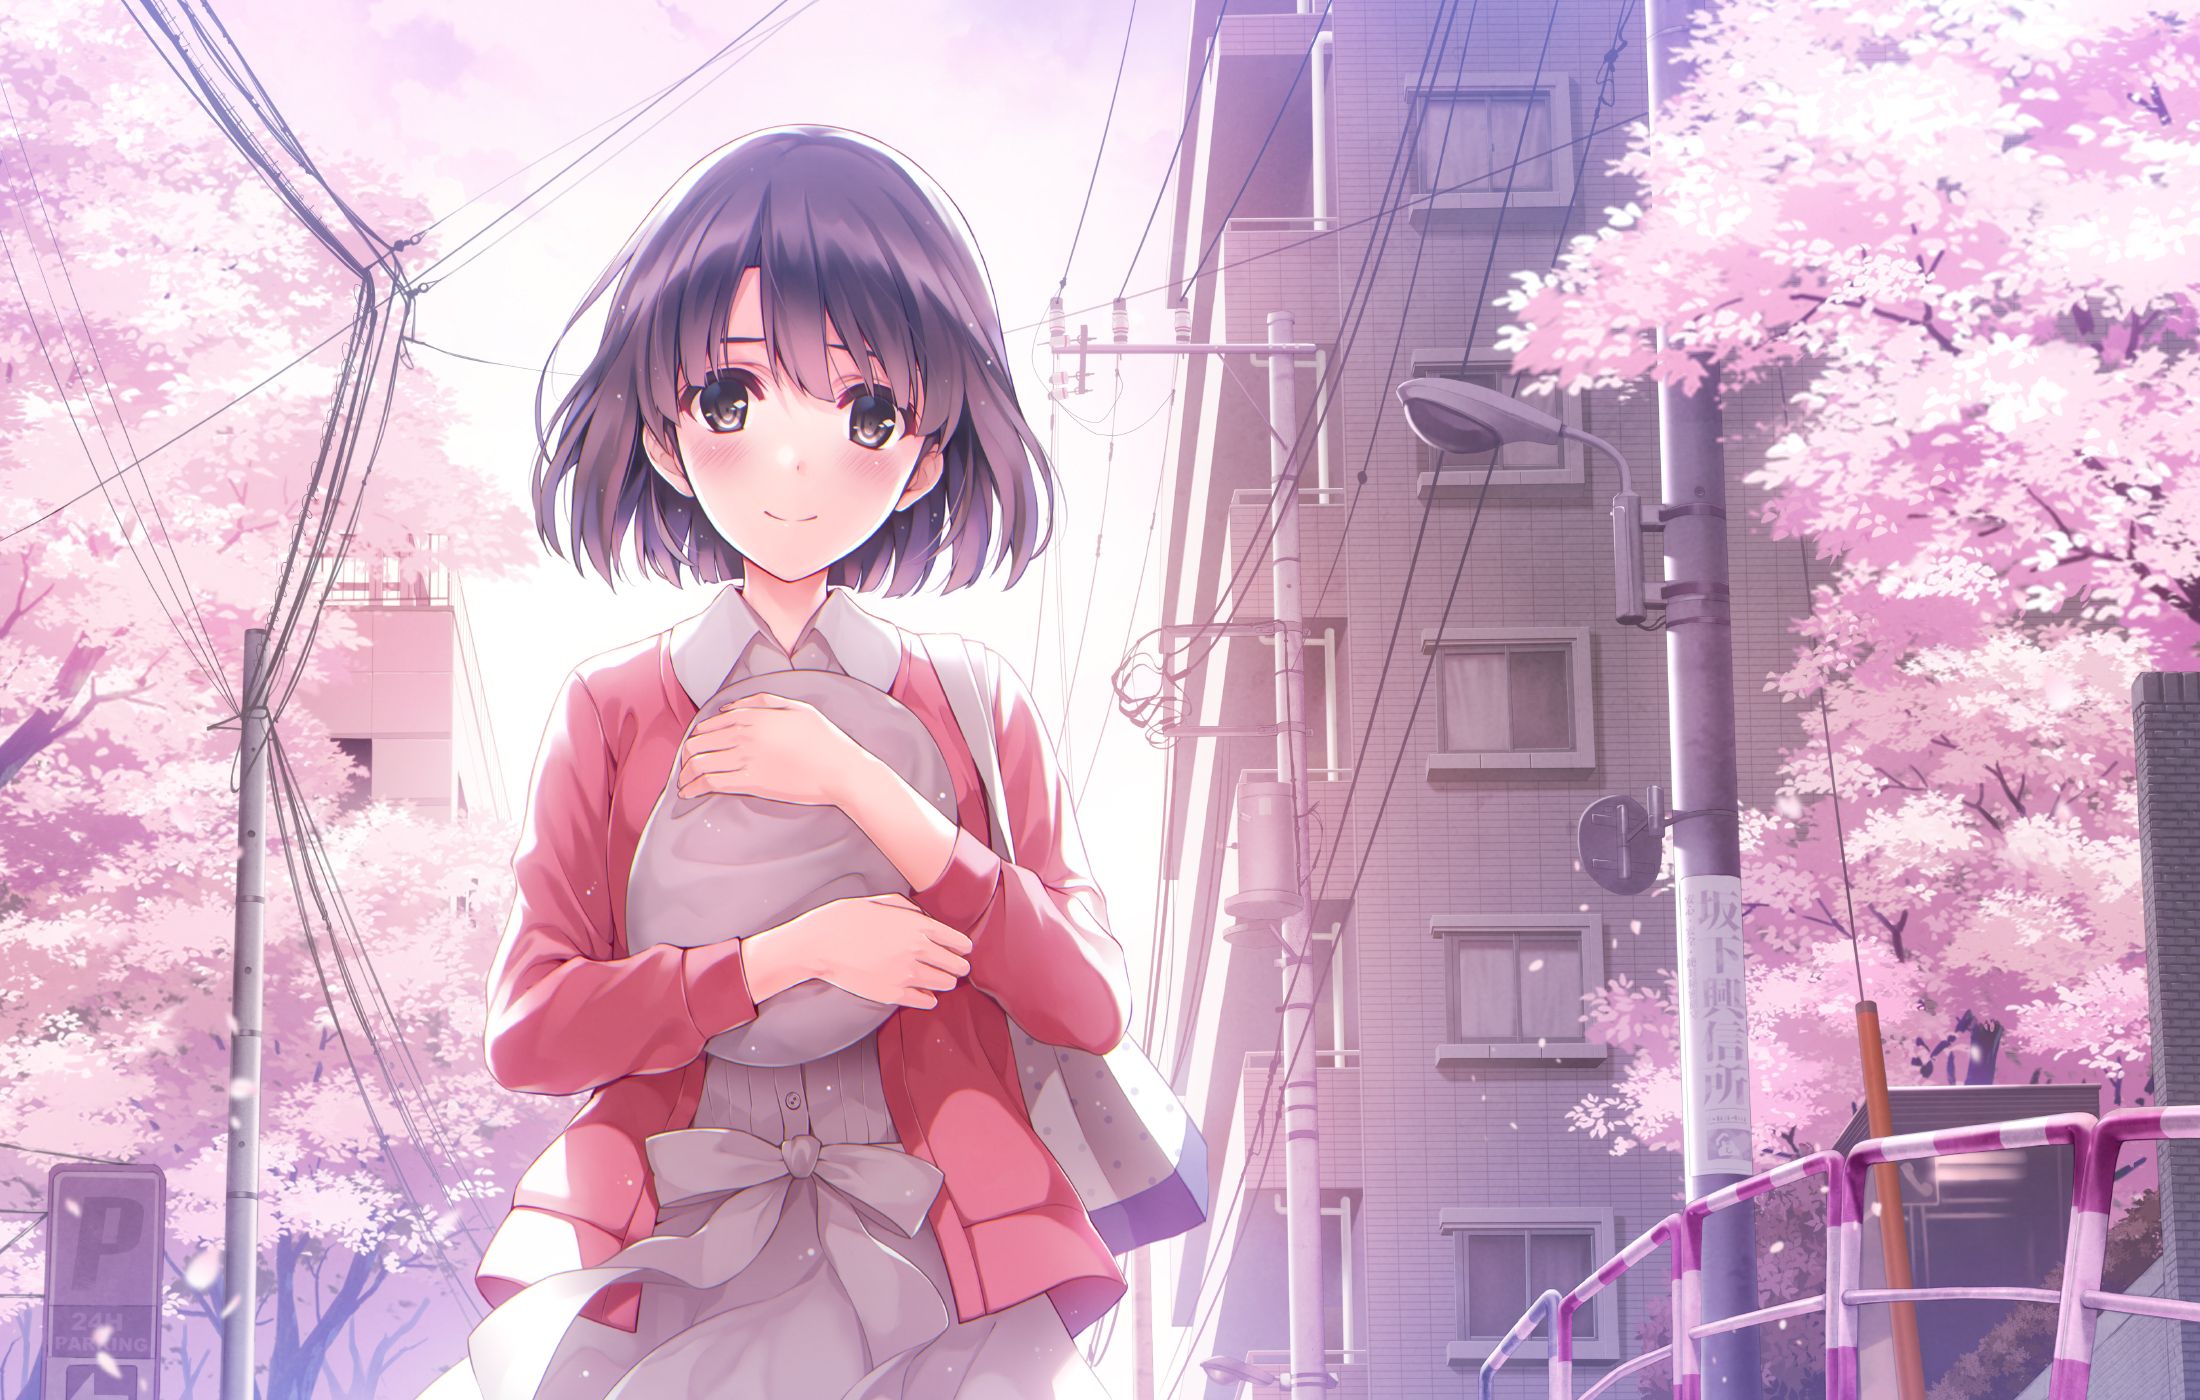 Popular Saekano: How To Raise A Boring Girlfriend Image for Phone